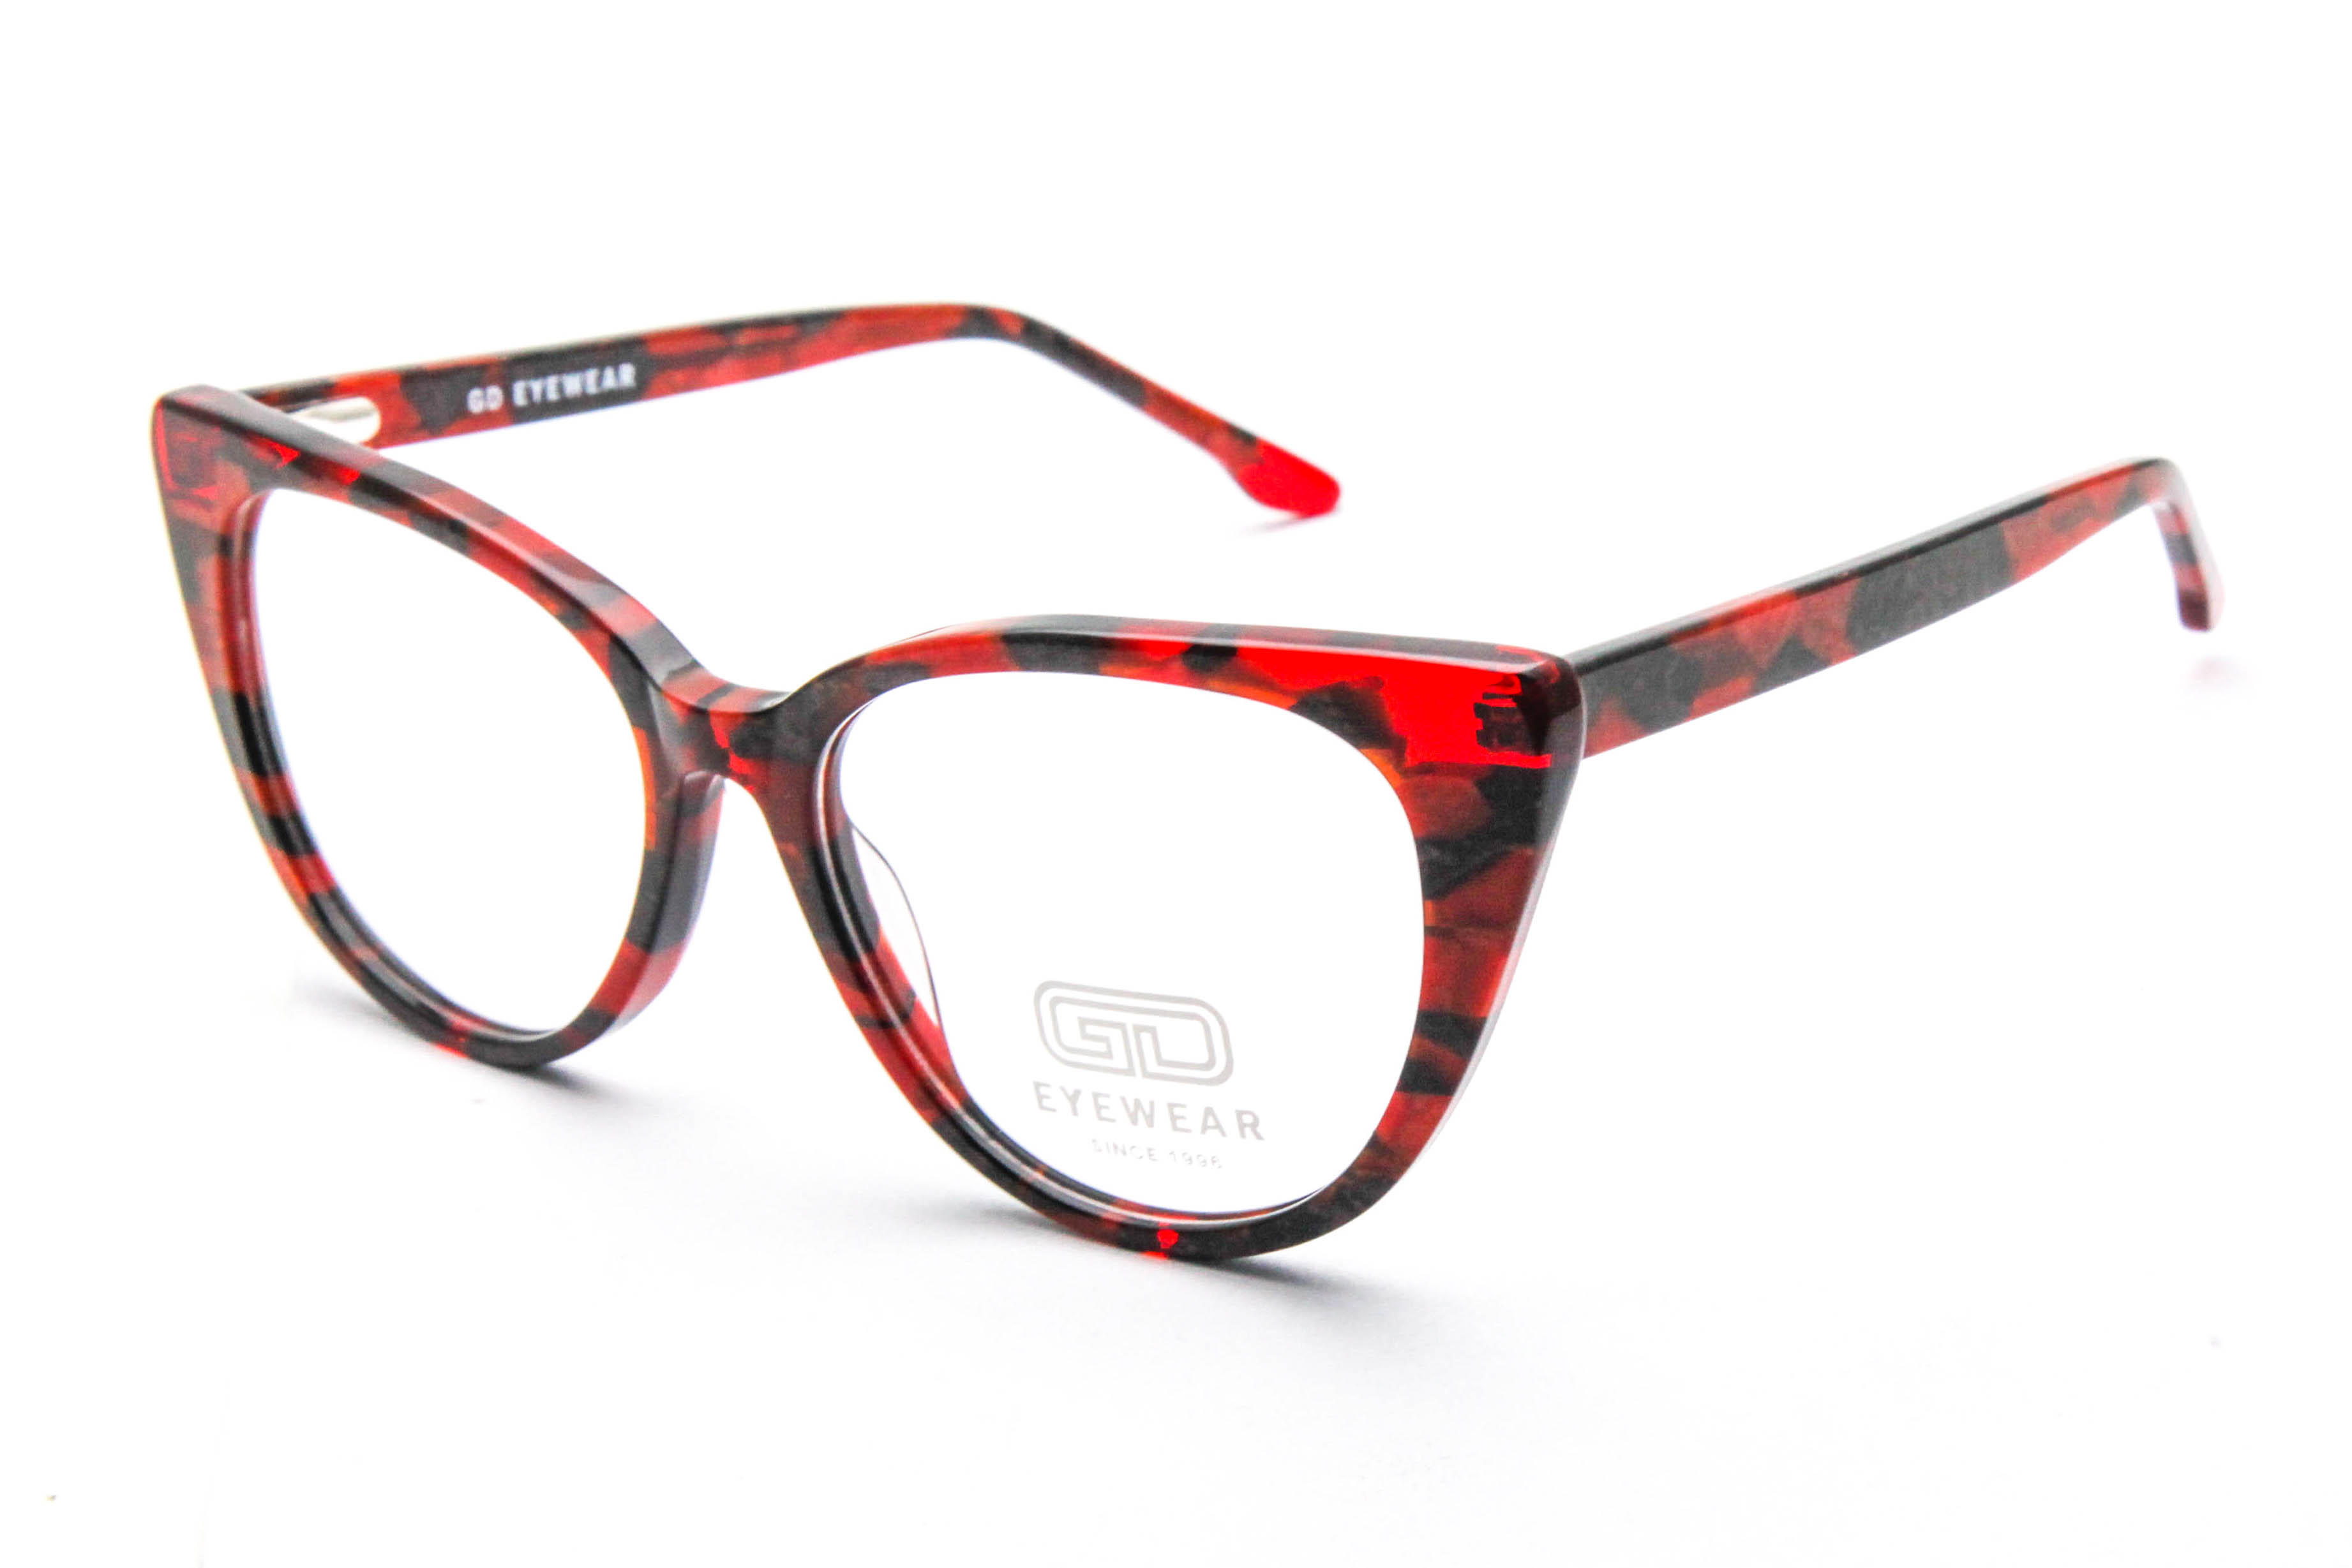 Introducing the Cutting-Edge Lamination Acetate Optical Frames by GUANDE GLASSES